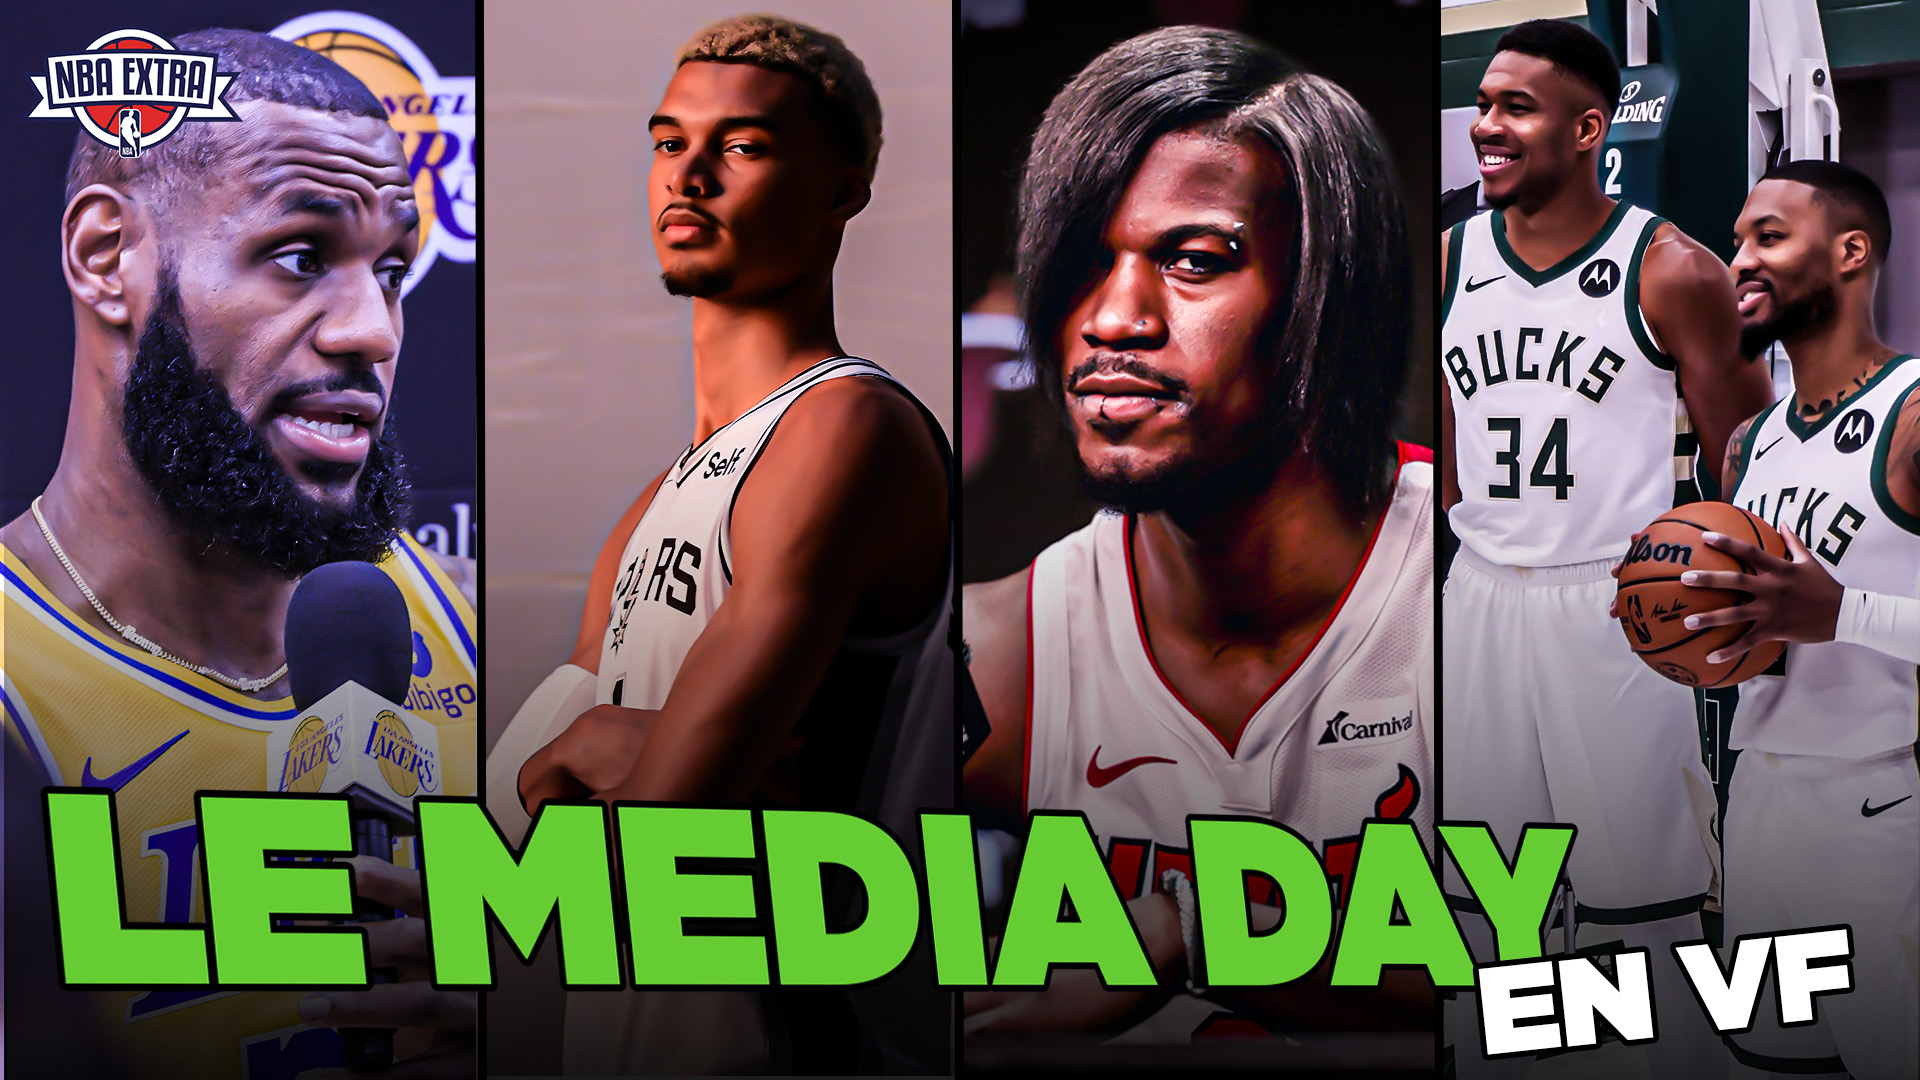 NBA : Wemby, LeBron, Curry... Les meilleurs moments du Media Day en VF !